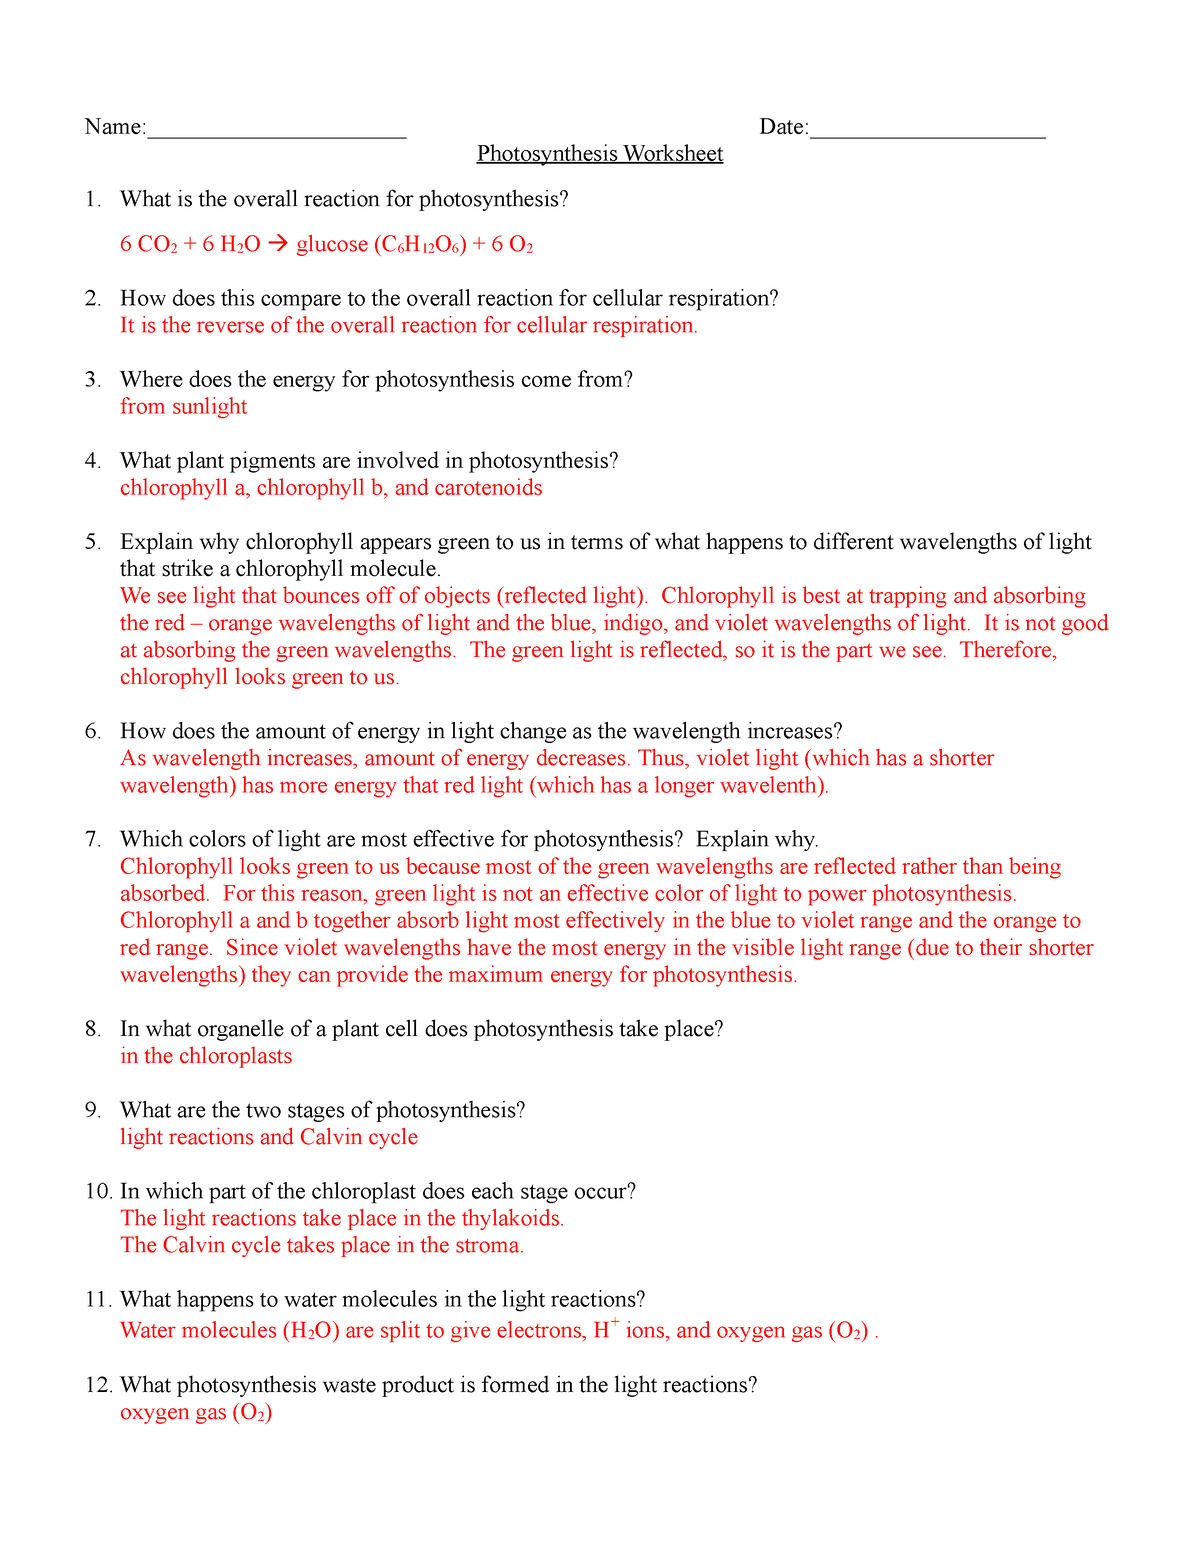 photosynthesis-worksheet-answers-name-date